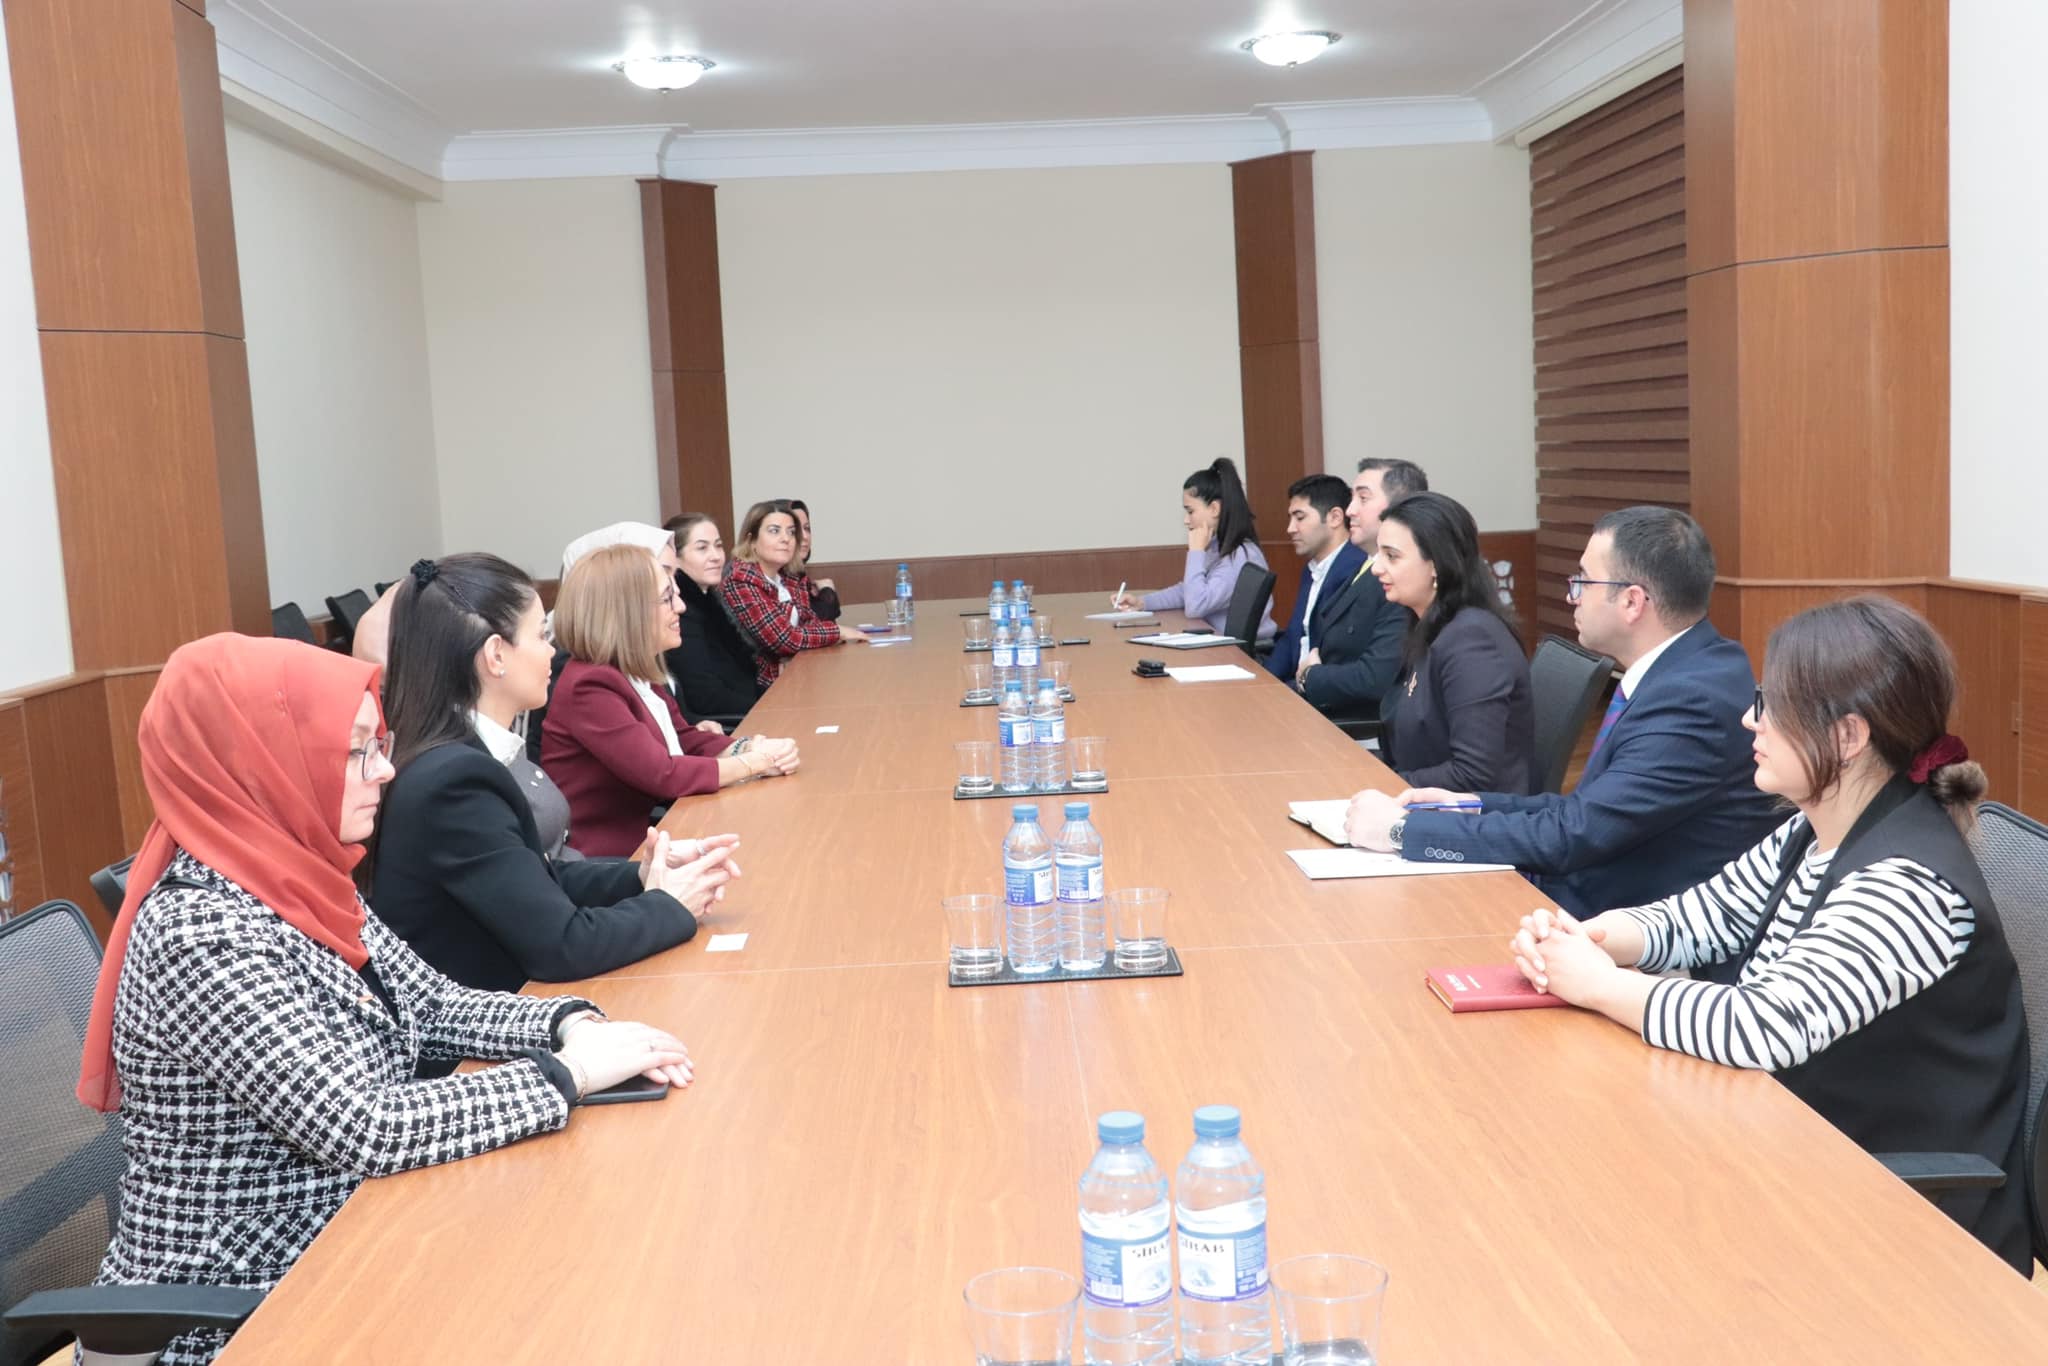 The State Committee held a meeting with representatives of the Women and Democracy Organization of Turkiye (KADEM)